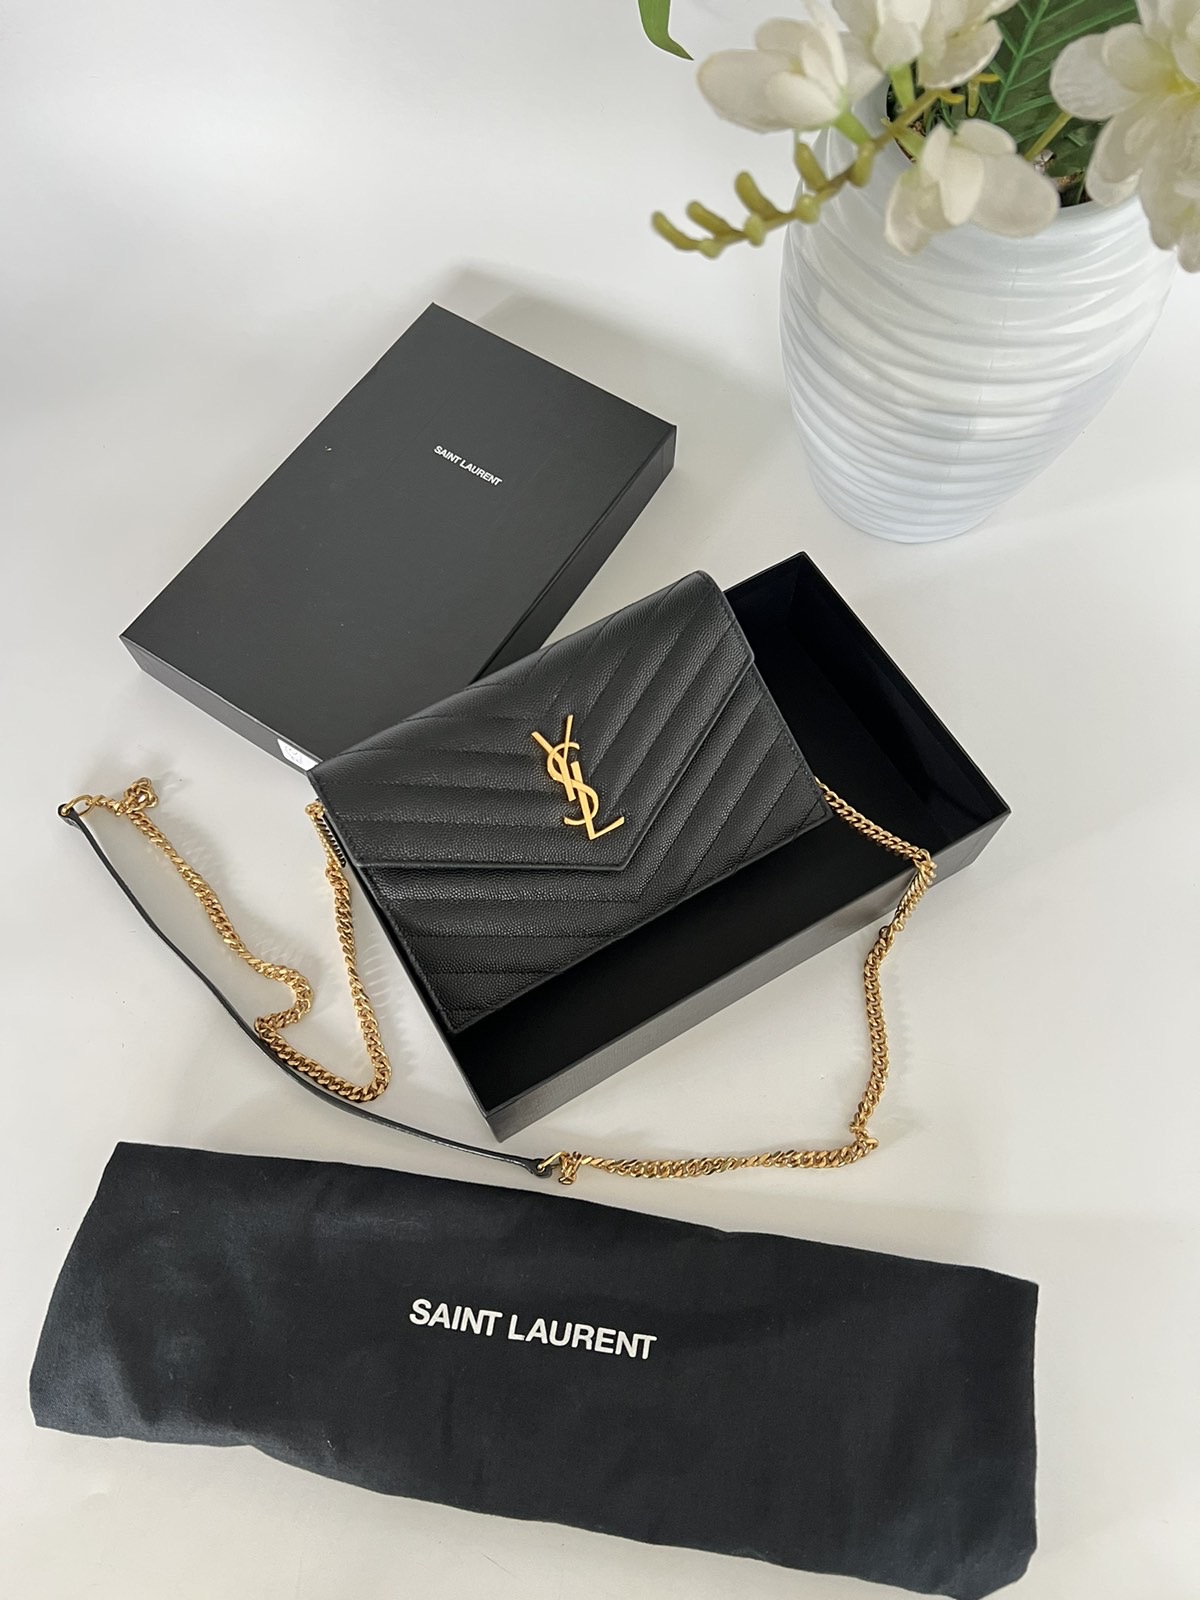 YSL Black Wallet on Chain GM Silver Hardware. Made in Italy. With box ❤️ -  Canon E-Bags Prime